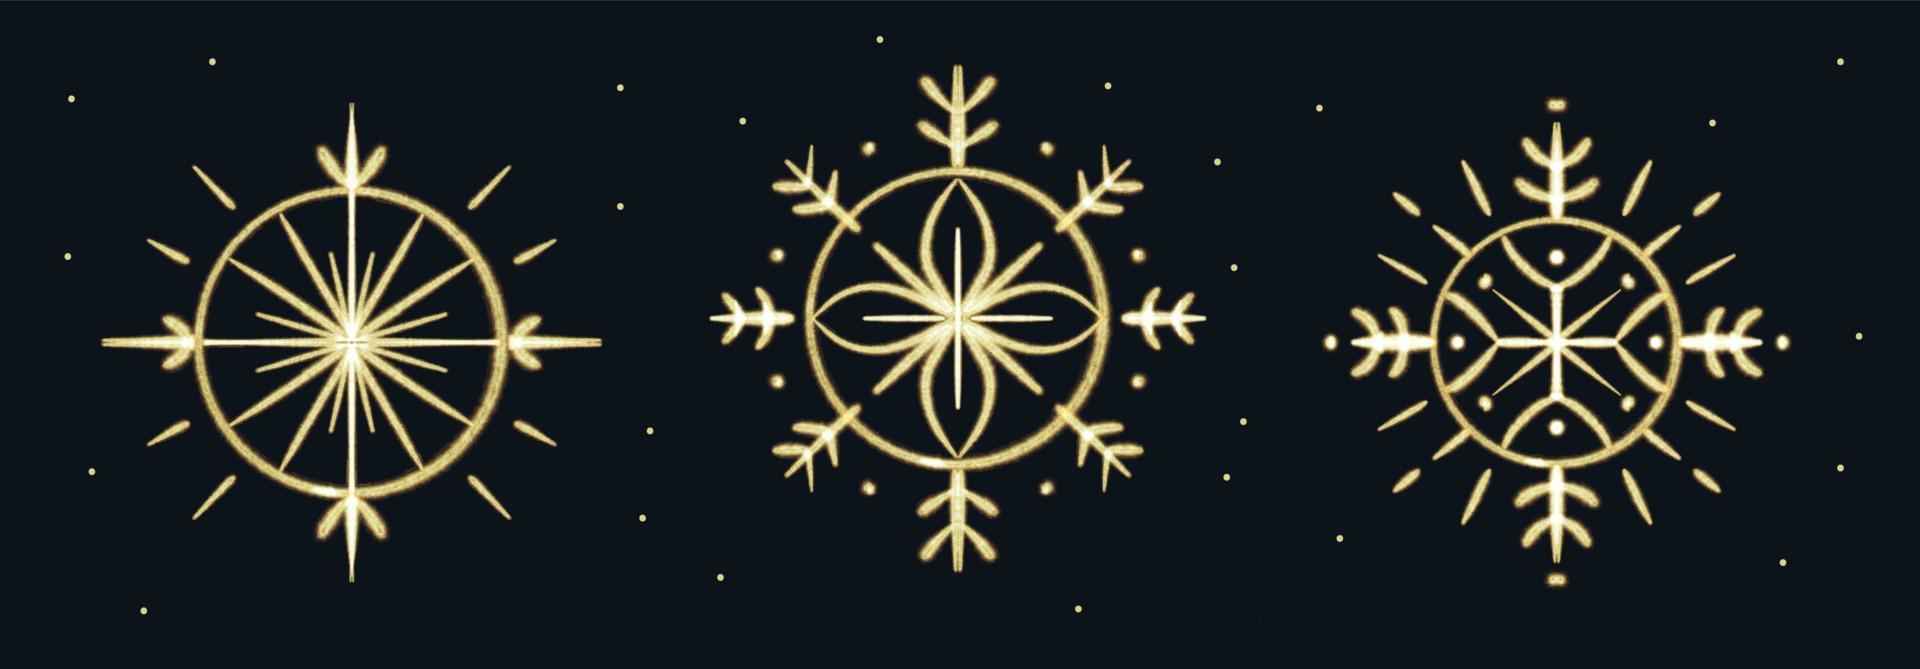 Set of brushstroke hand drawn Gold Snowflakes for Christmas design. Winter Holidays isolated elements vector